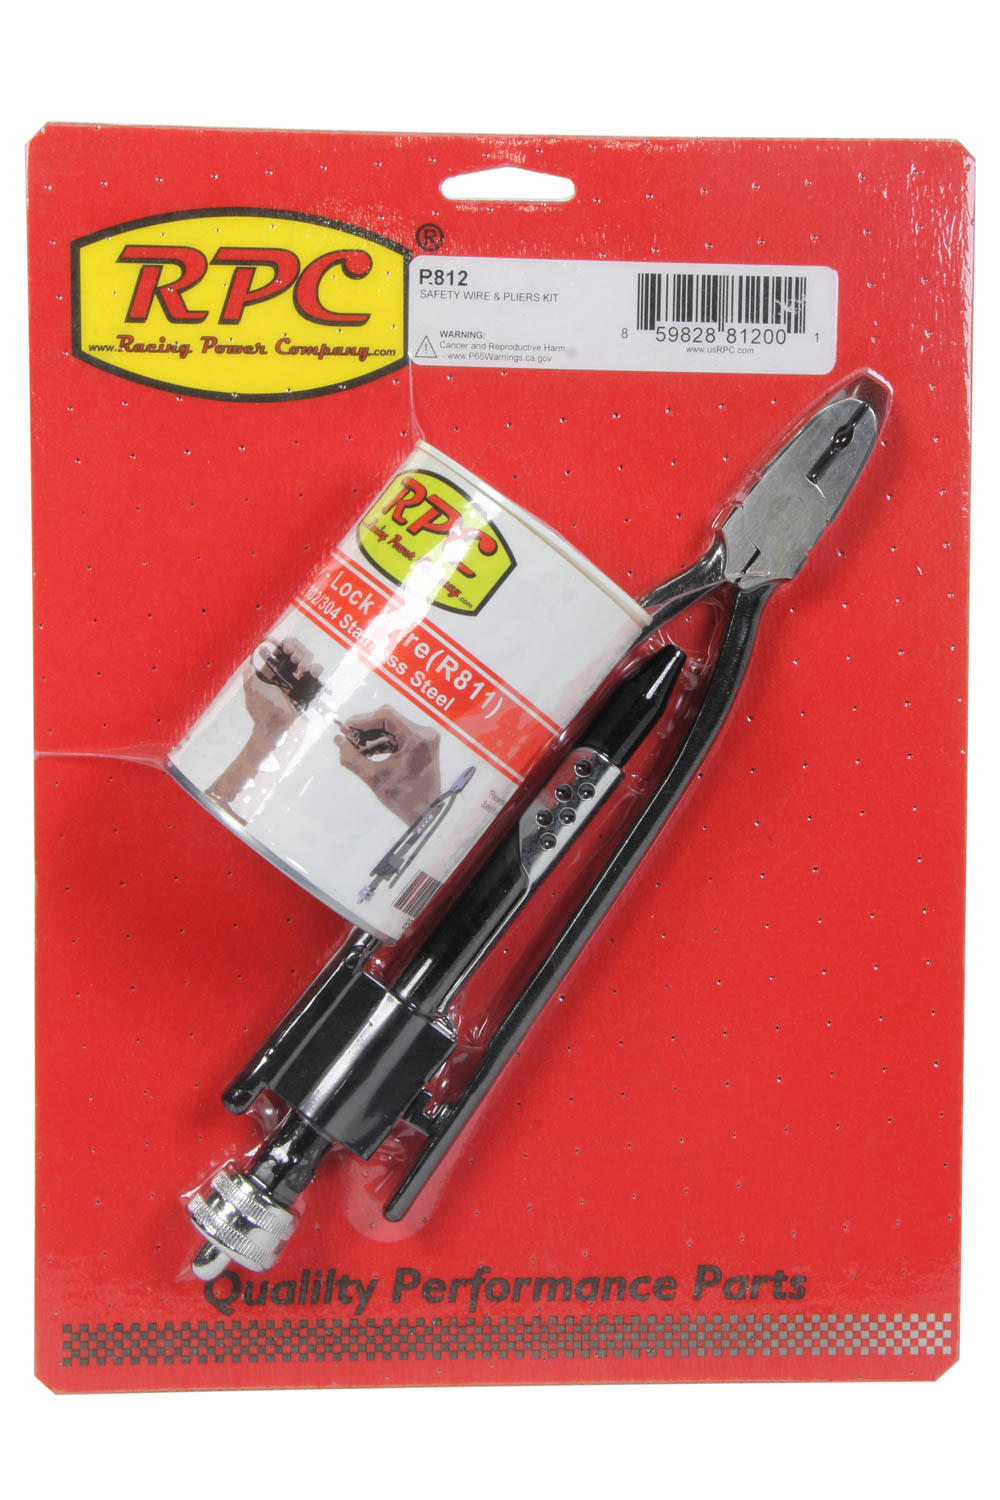 Racing Power Company R812 - Safety Wire, 0.032 in Diameter, Pliers Included, Stainless, 1 lb, Each